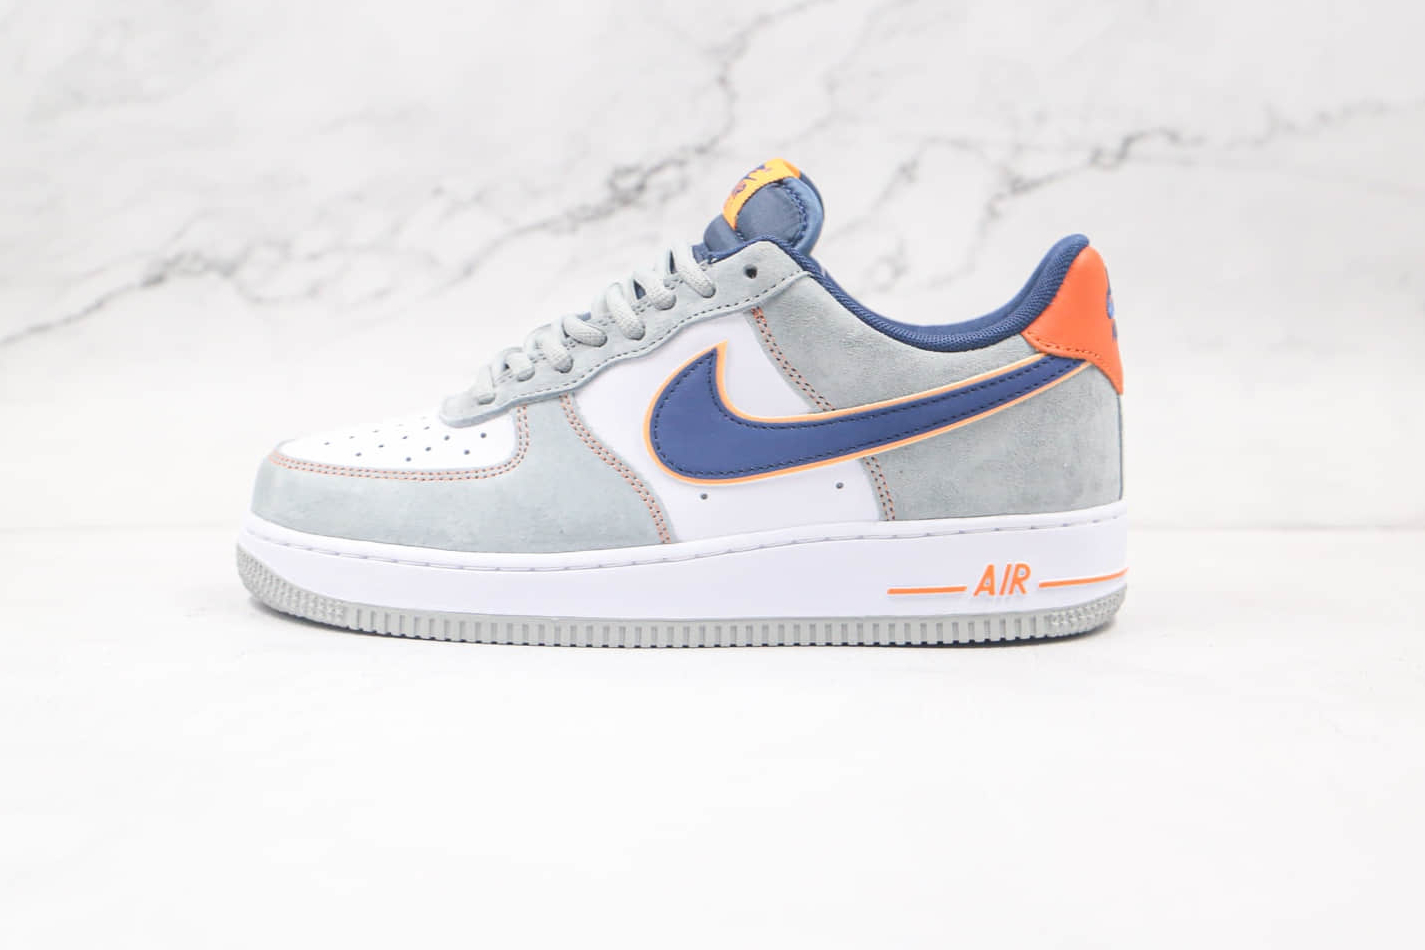 Nike Air Force 1 07 Low White Cool Grey Navy Blue Orange CQ5059-103 – Classic Style with a Colorful Twist